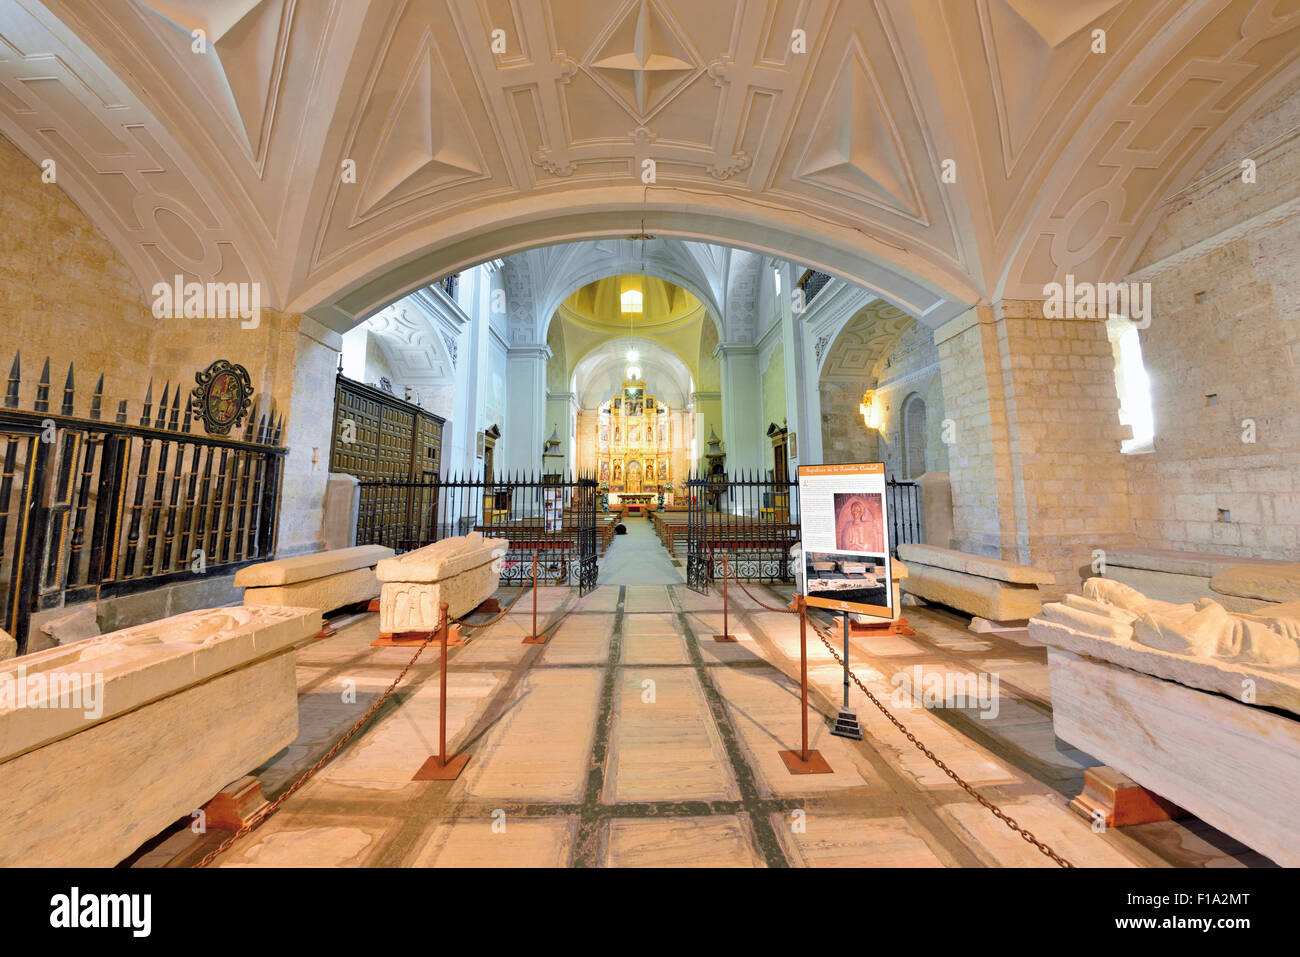 Spain, St. James Way: Tombs and nave of  monastery church Real Monasterio de San Zoilo in Carrion de los Condes Stock Photo